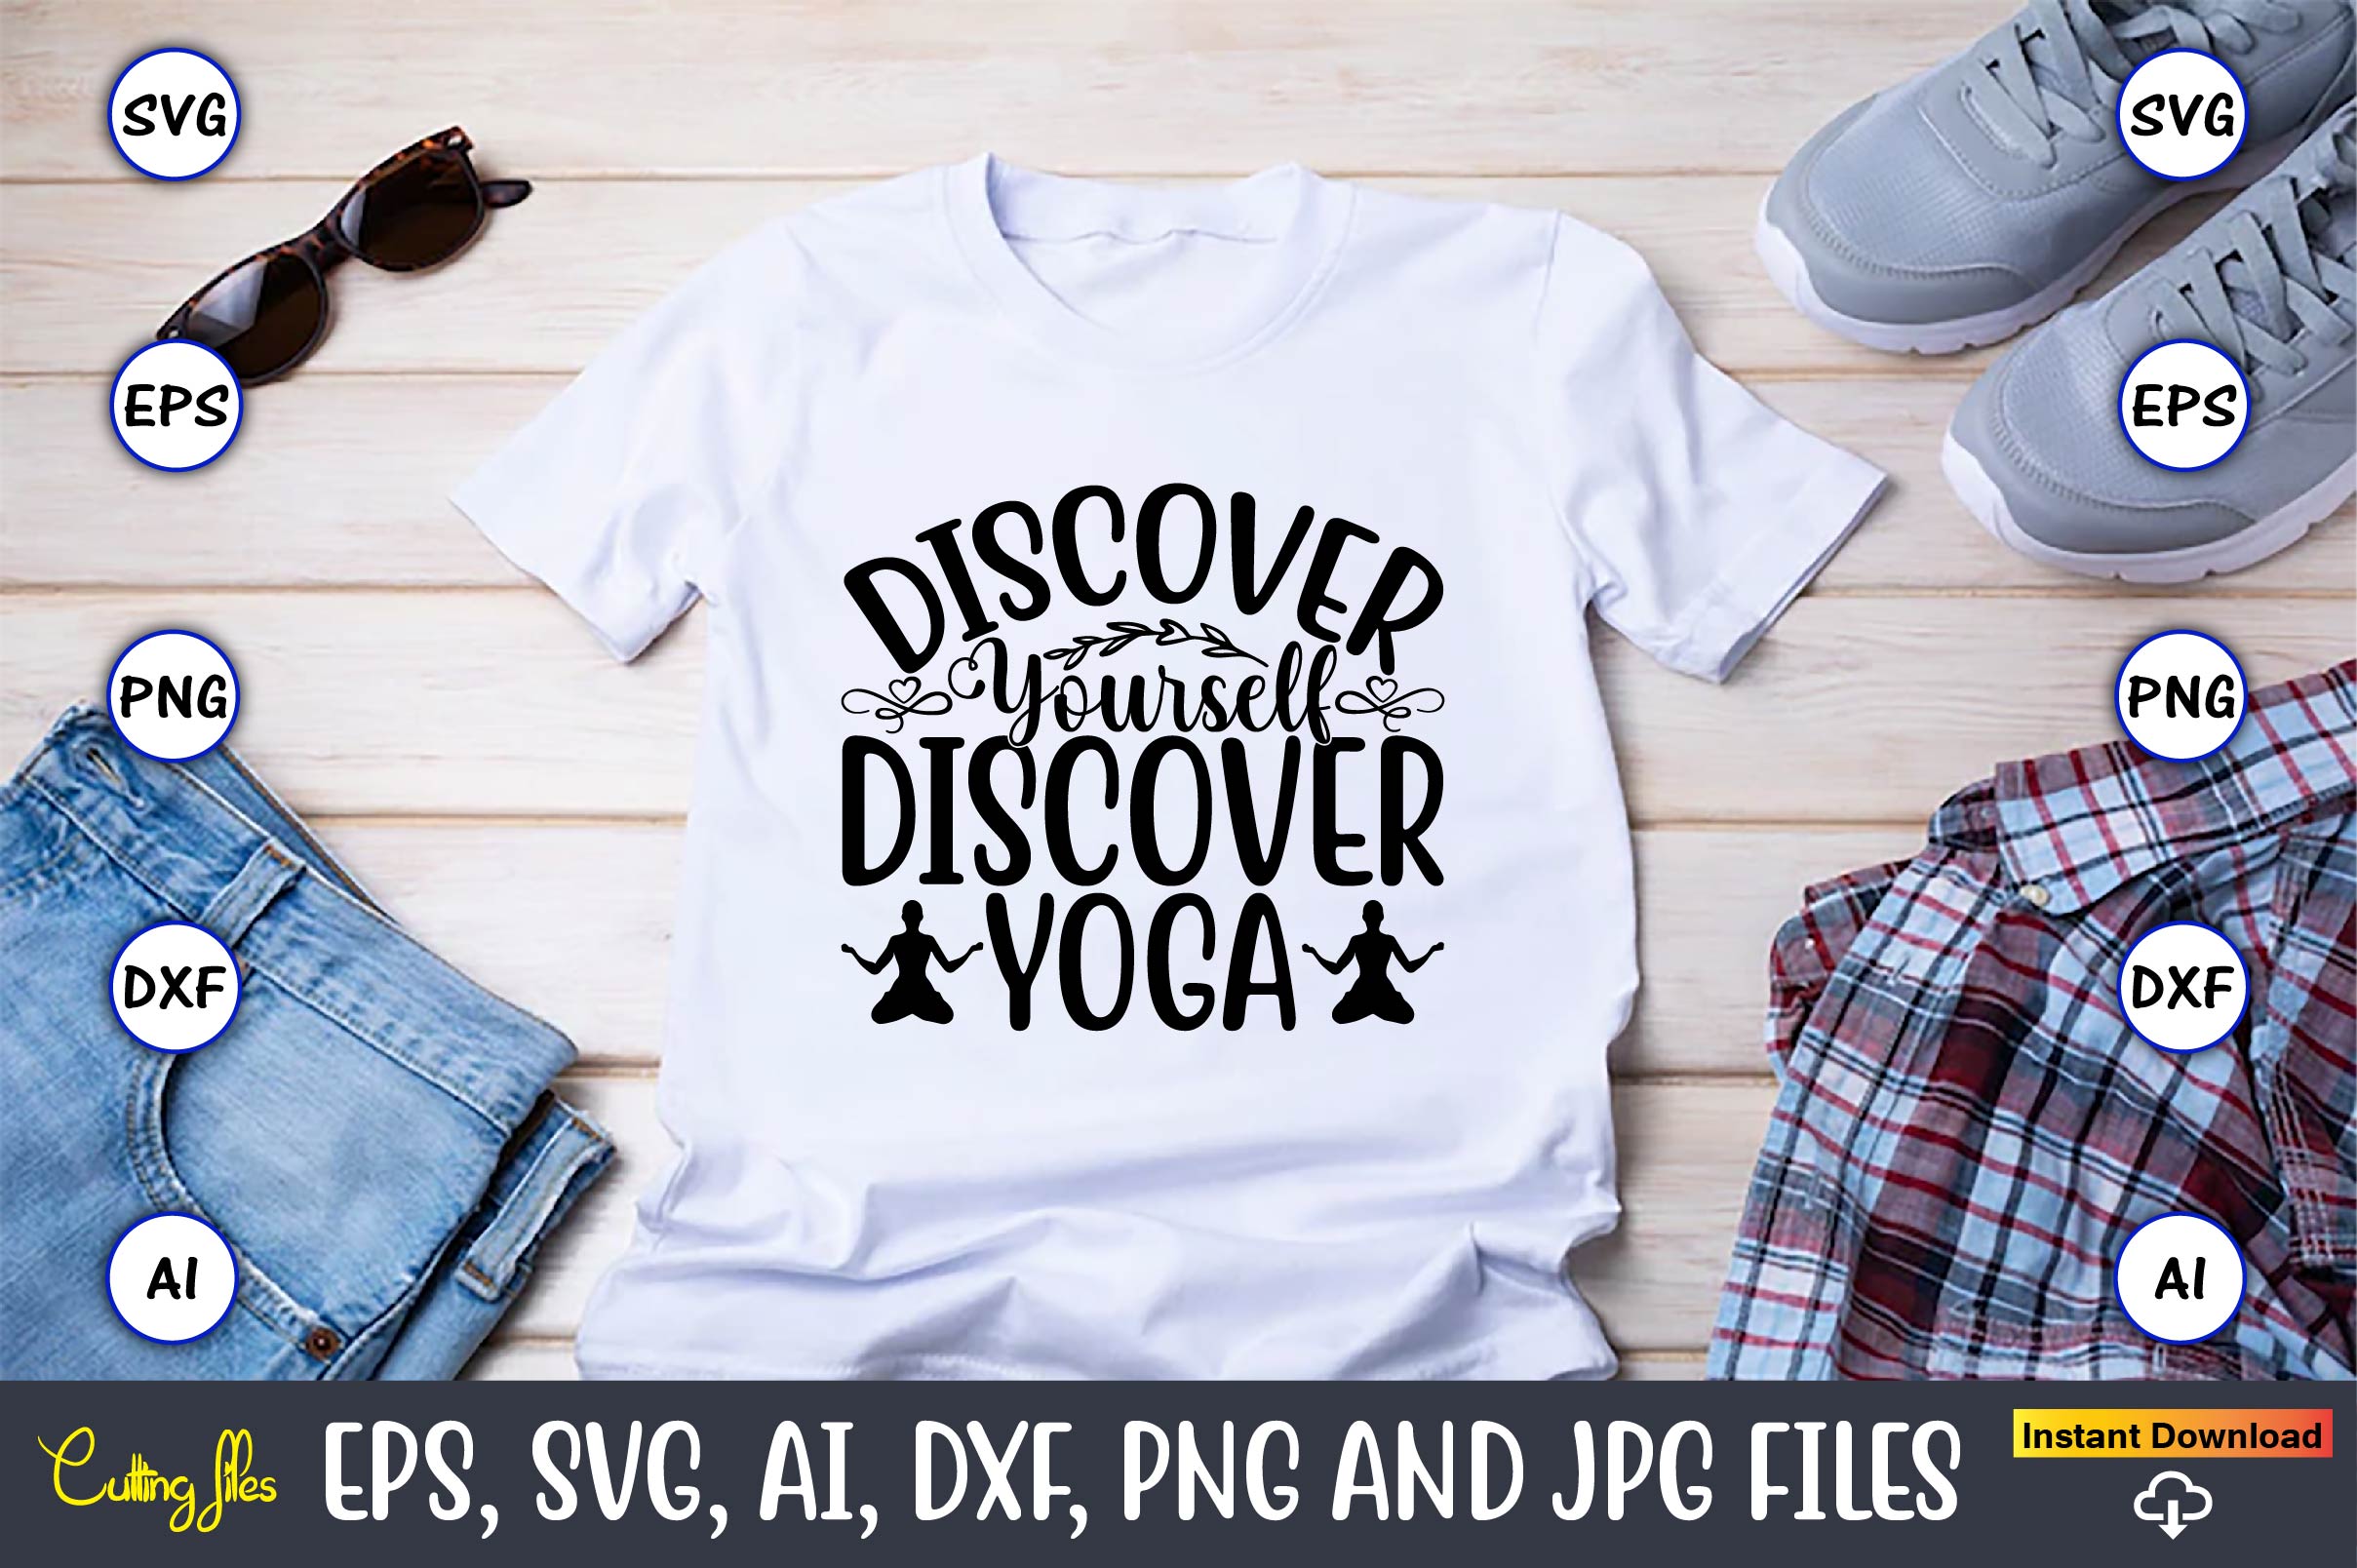 Image of a white t-shirt with a charming inscription Discover yourself discover yoga.